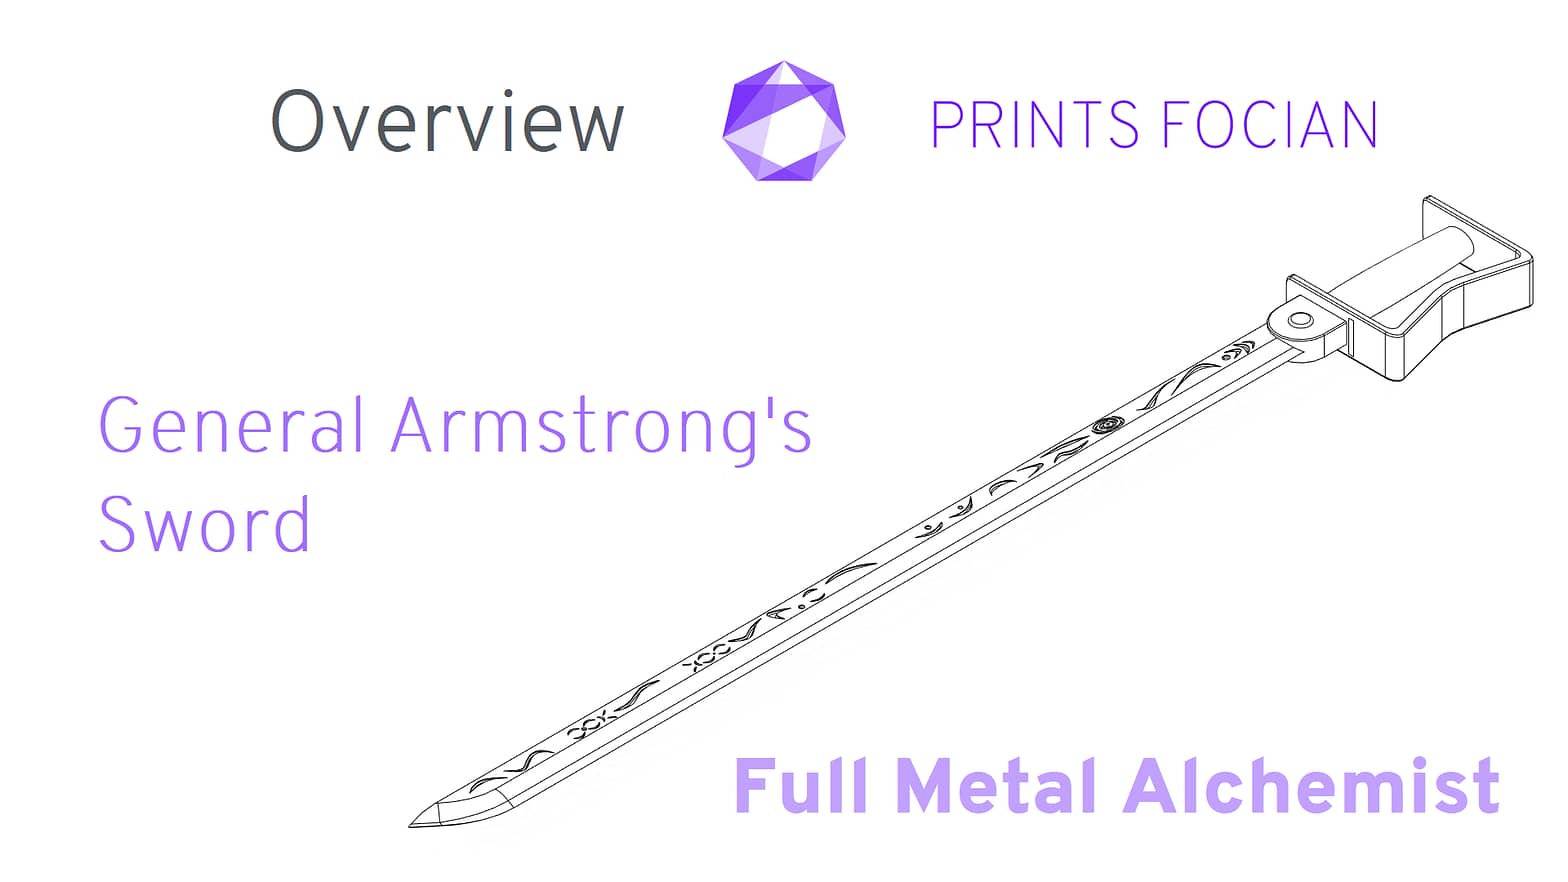 Wireframe image of the General Armstrong's Sword on a white background. Prints Focian Icon top and central. Text: Purple Prints Focian, General Armstrong's Sword, Full Metal Alchemist and dark grey Overview